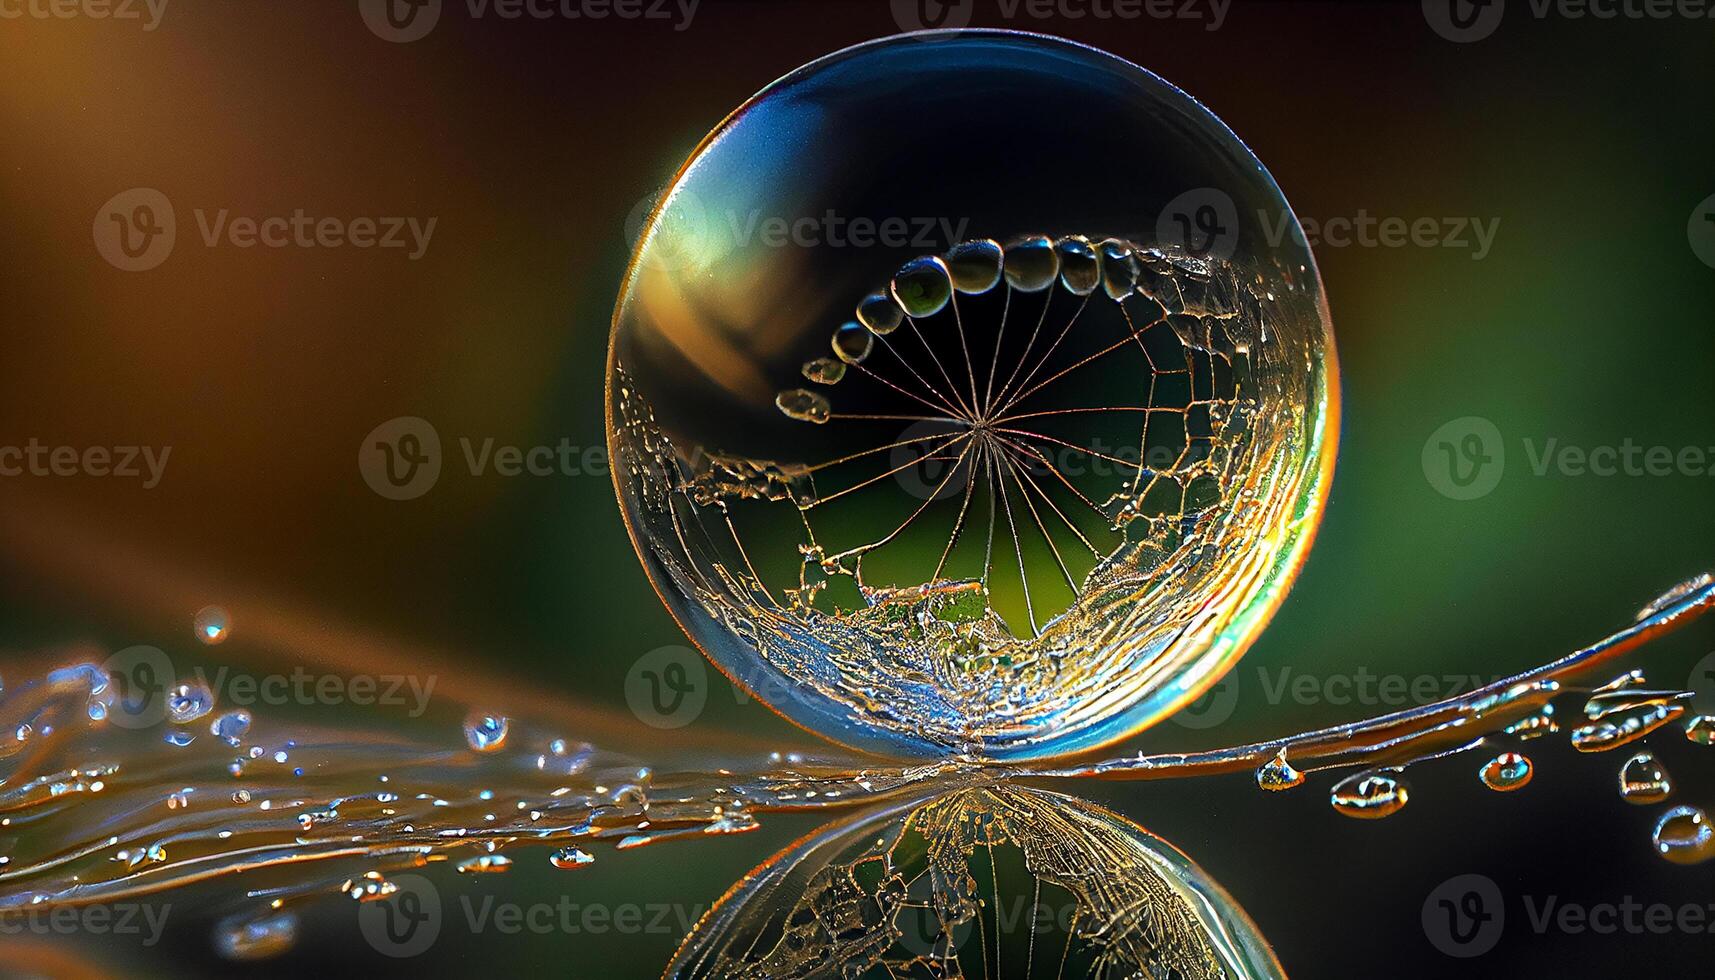 Nature beauty captured in a shimmery sphere generated by AI photo